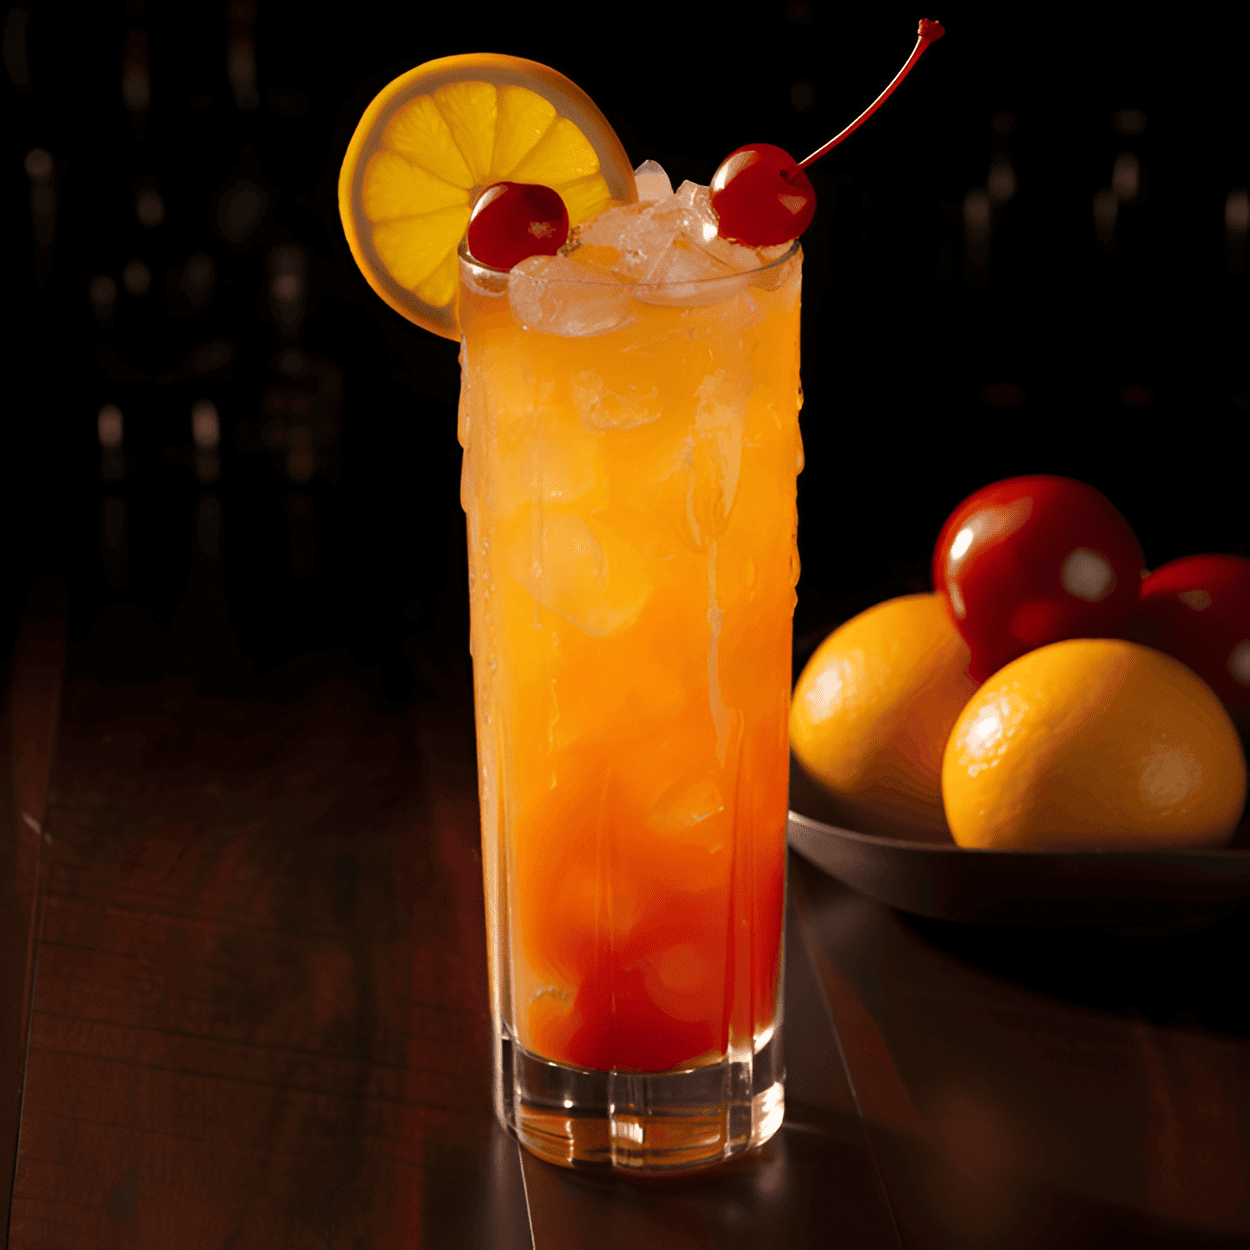 Fog Cutter Cocktail Recipe - The Fog Cutter is a robust cocktail with a complex flavor profile. It's strong and boozy, yet balanced with a sweet and sour tang from the citrus juices and orgeat. The gin, brandy, and rum blend seamlessly, creating a rich, layered taste that's both refreshing and invigorating.